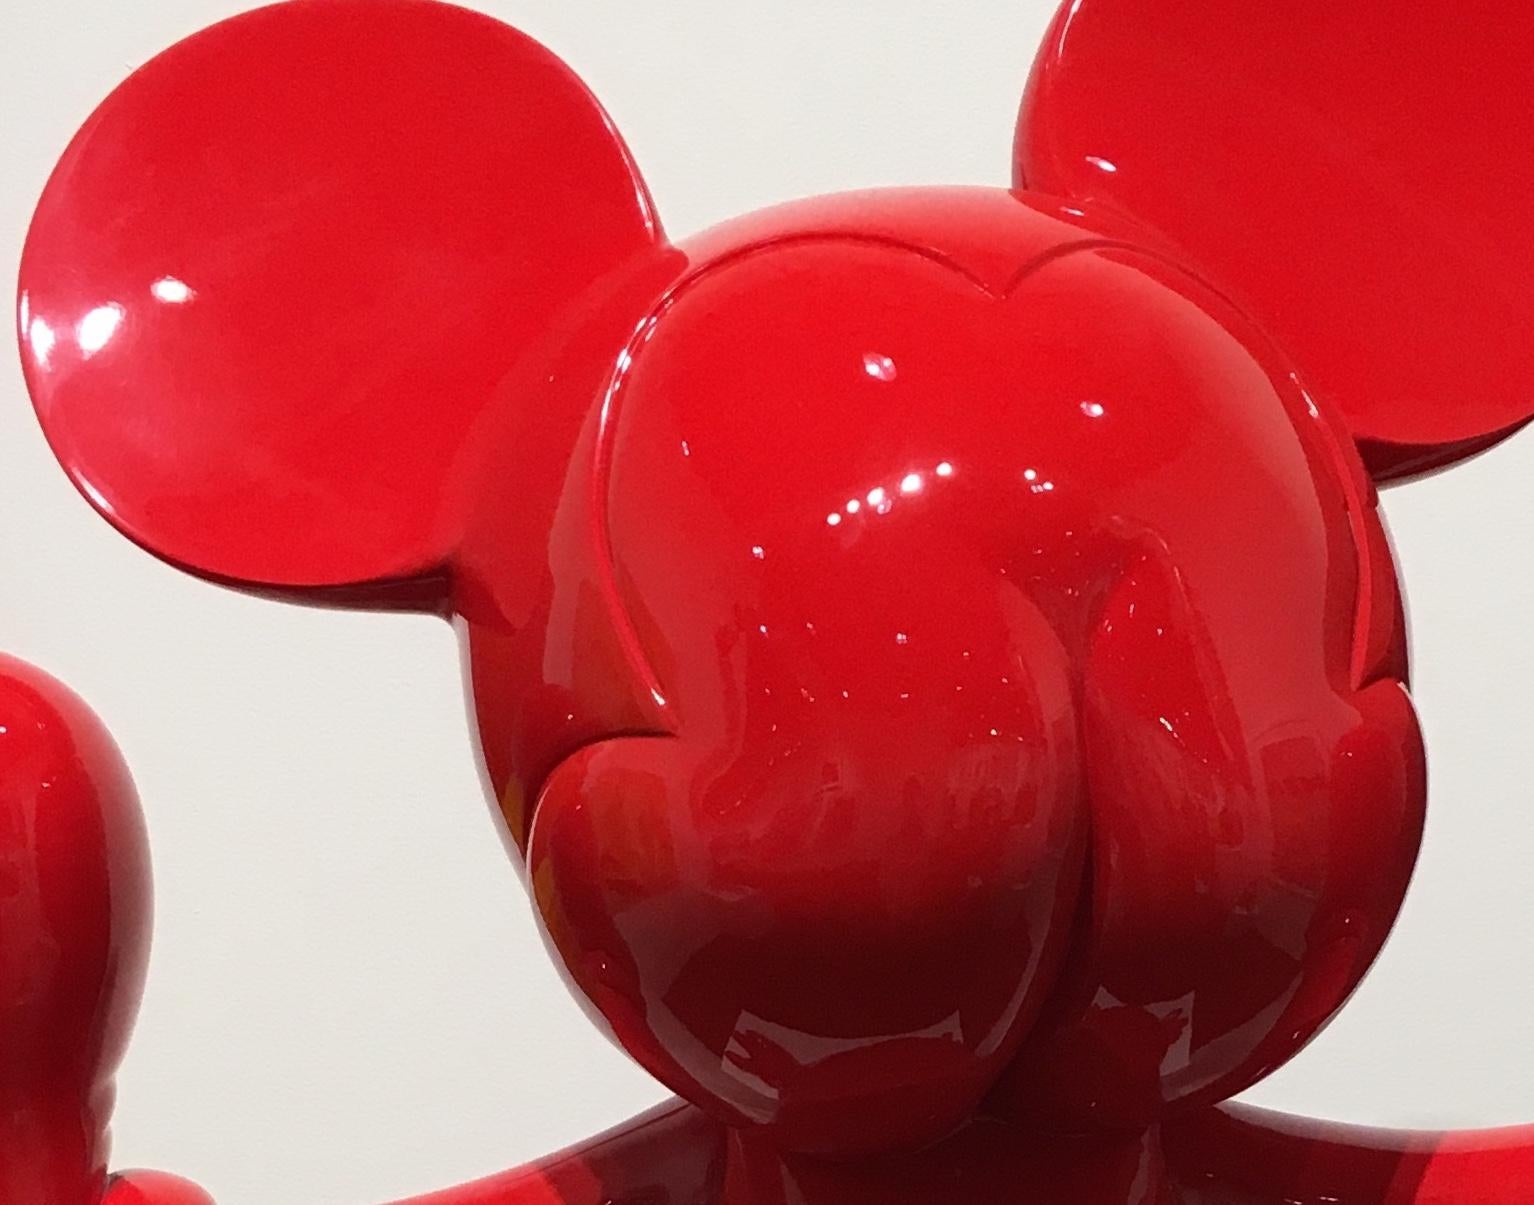 Freaky Mouse (small) - Polished Chrome or Resin - Sculpture by Fidia Falaschetti